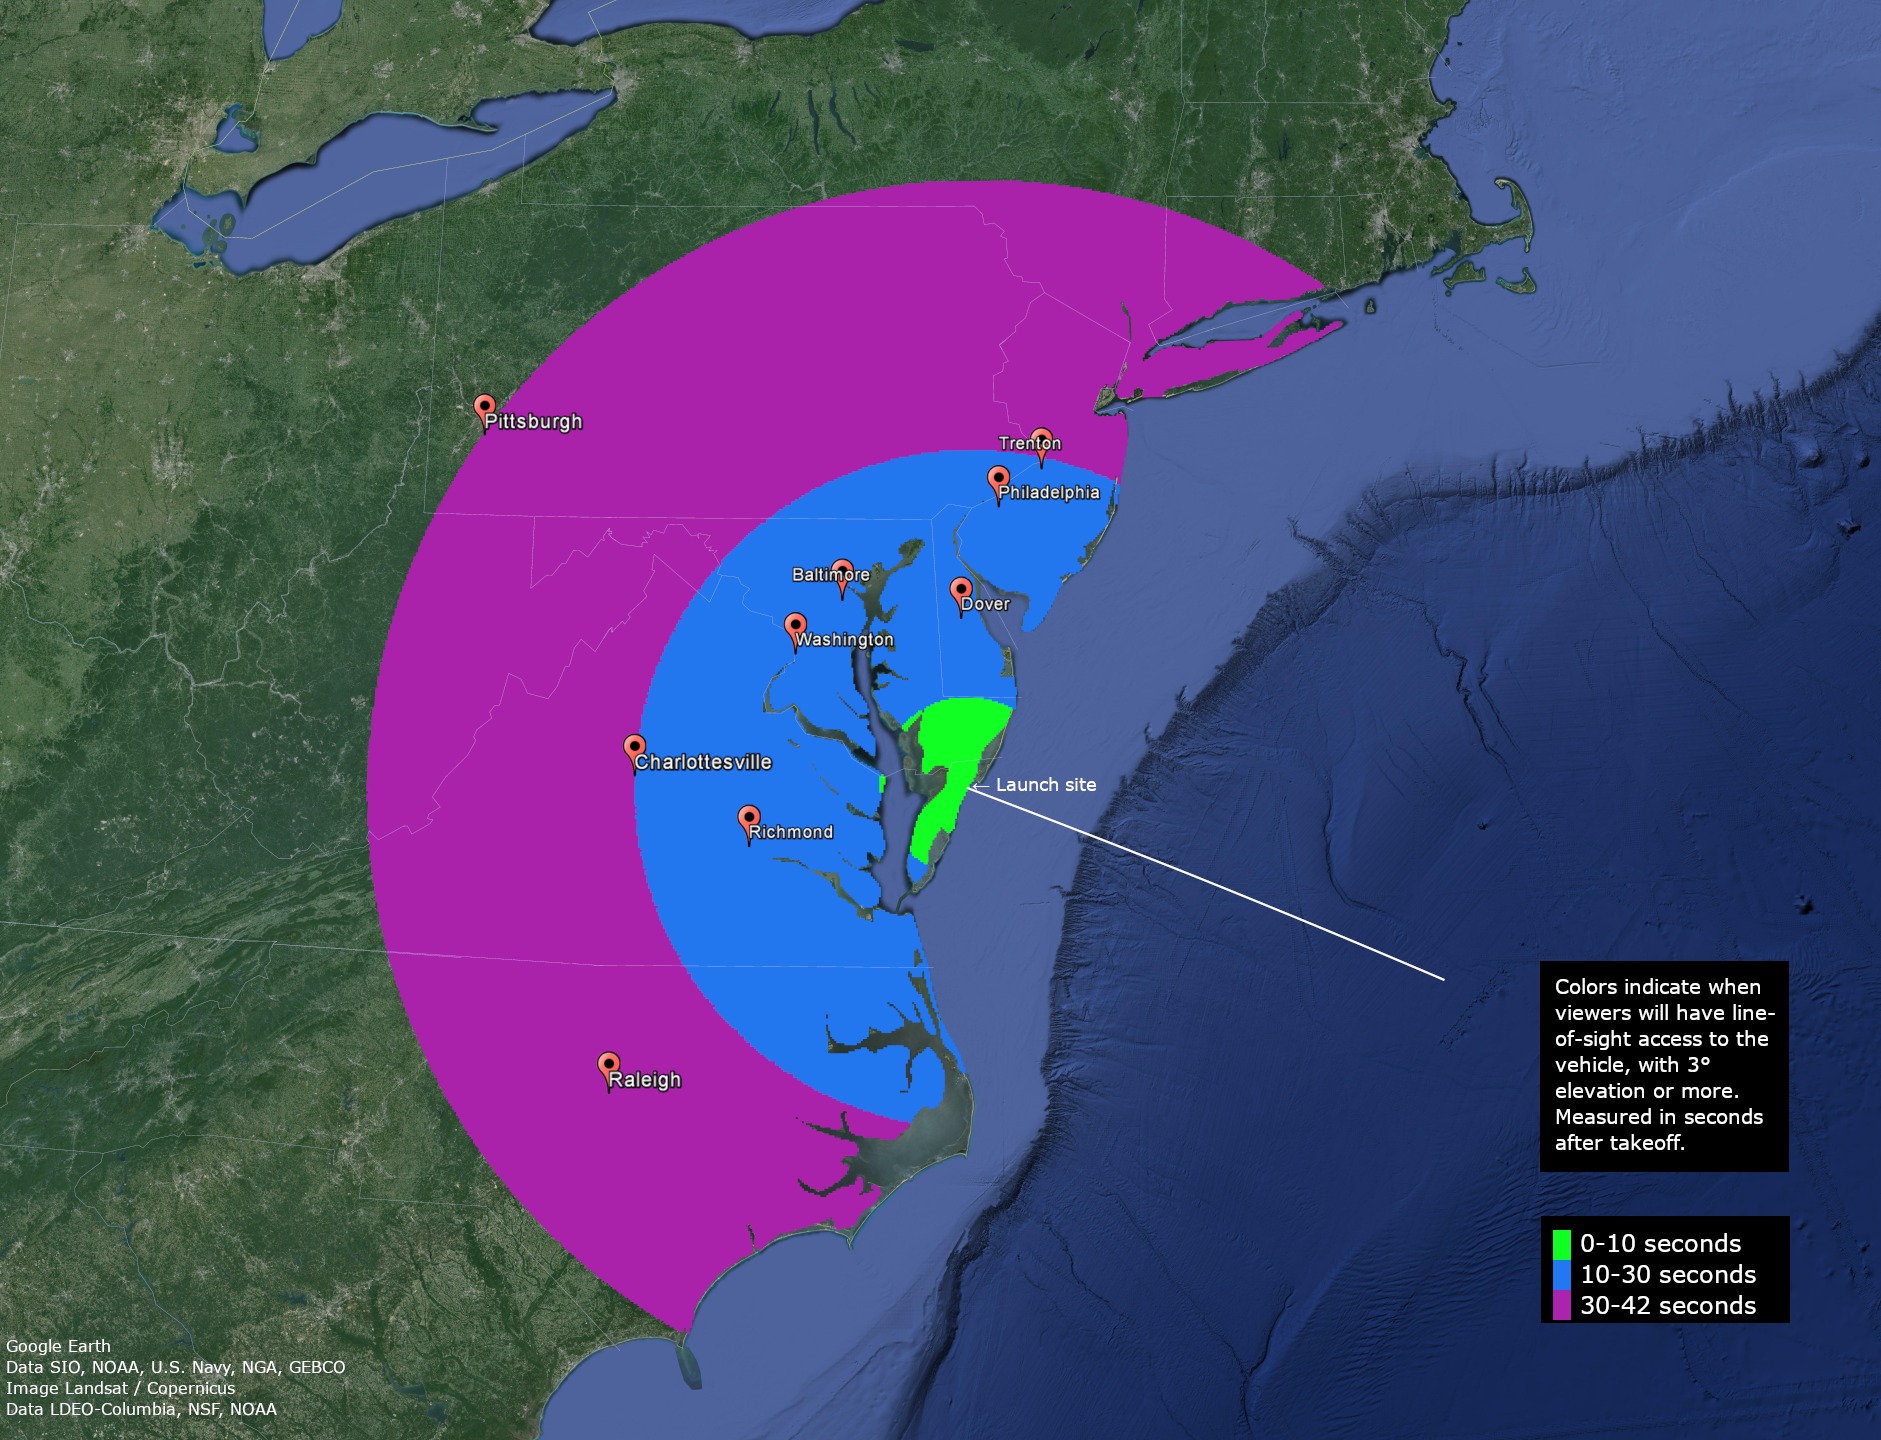 A visibility map showing the mid-Atlantic region. The map shows how many seconds after that people in the area may be able to see the Black Brant IX sounding rocket in the sky.  The land is green and the ocean is dark blue. Visibility of 30-42 seconds is represented by a bright pink semi-circile reaching up to eastern Massachusetts, through most of Pennsylvania, through eastern West Virginia, Virginia and North Carolina. Visibility area for viewers with a line-of-sight 10-30 seconds after launch is a blue semi-circle reaching from middle of New Jersey down to north North Carolina and inland to Virginia. Visibility from 0-10 seconds is indicated by a bright green semi-circle mostly covering to the edge of the southern border of Delaware and down into the Eastern Shore of Virginia. City labels starting north at Trenton, Philadelphia, Dover, Baltimore, Washington, Pittsburgh, Charlottesville, Richmond, and Raleigh. On the right is a black box with white words: "Colors indicate when viewers will have line-of-sight access to the vehicle, with 3° elevation or more. Measured in seconds after takeoff.